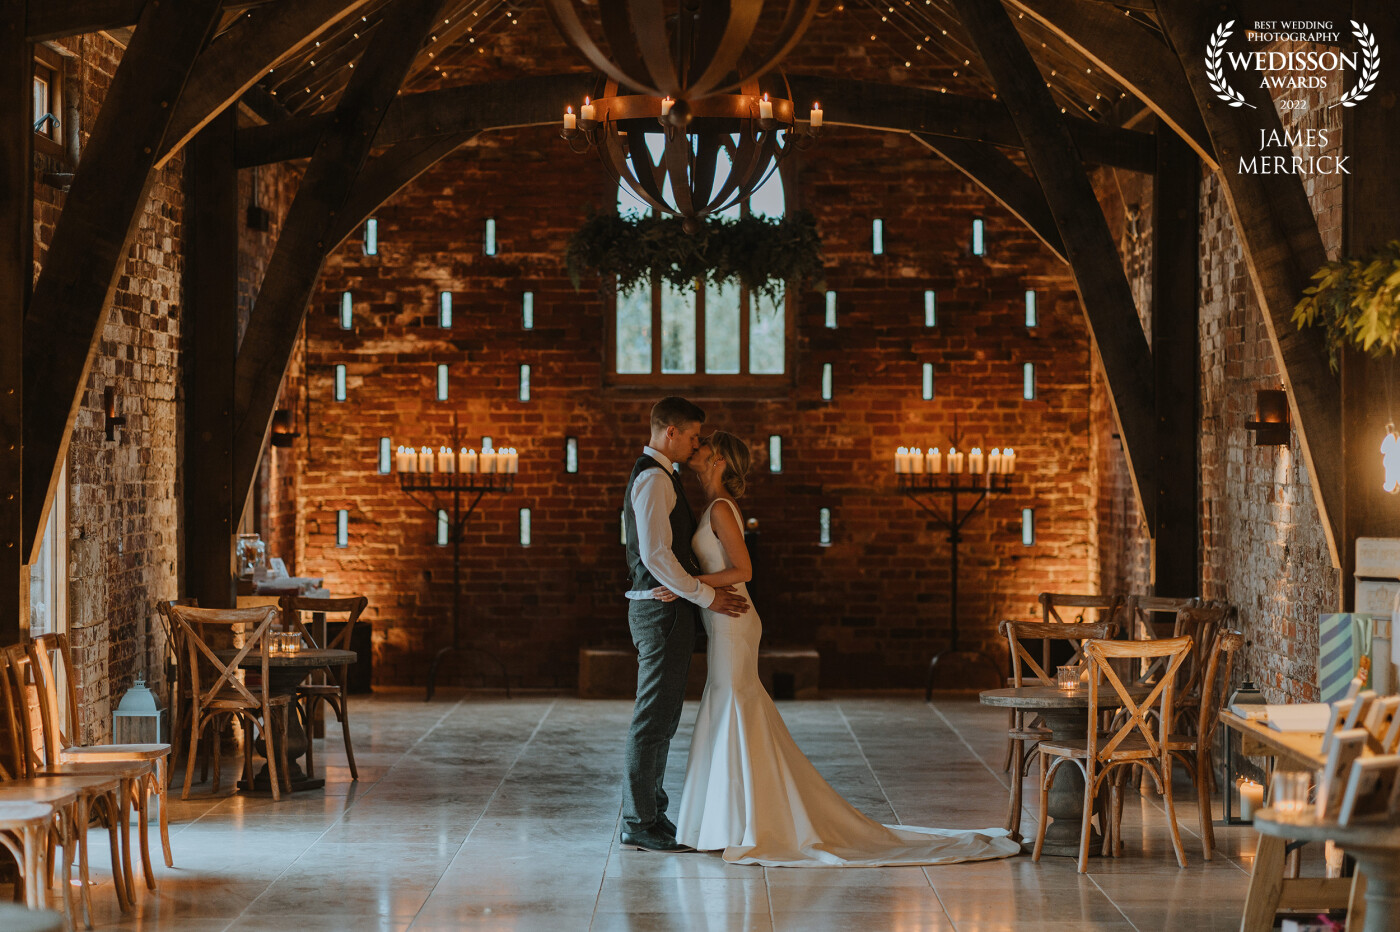 The ceremony barn at Grangefields, Derbyshire in the UK is something special and we made use of it for some special portraits right before Morgan & David’s first dance.